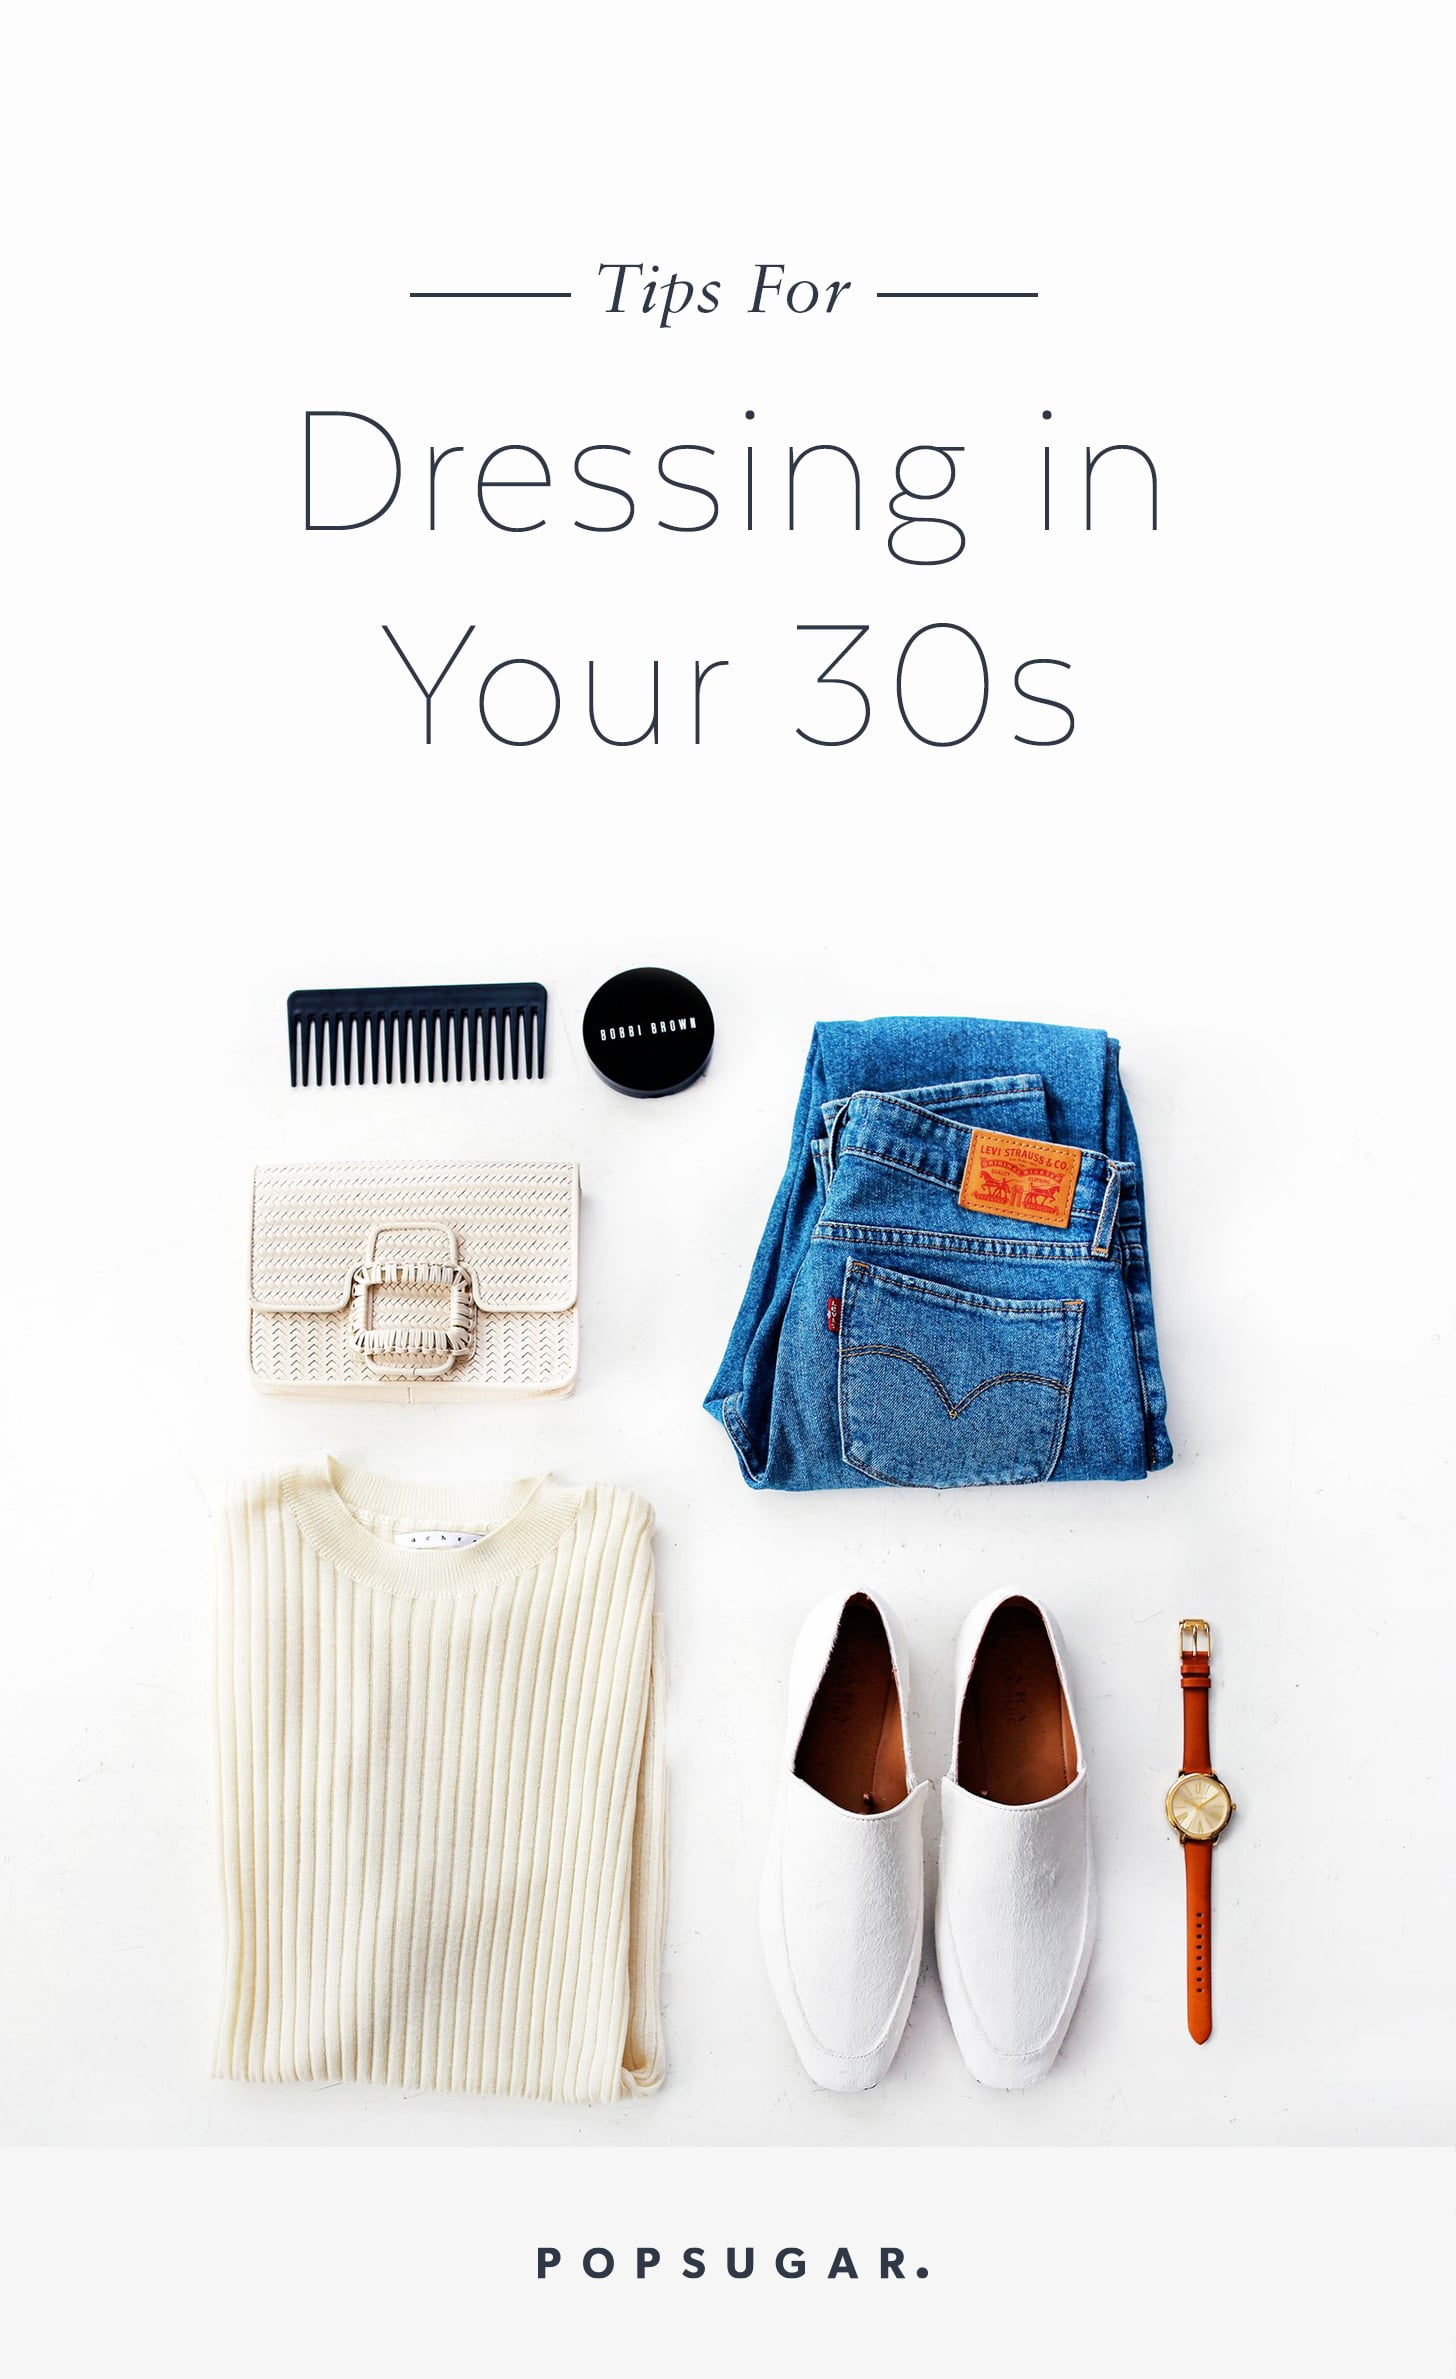 Tips For Dressing in Your 30s